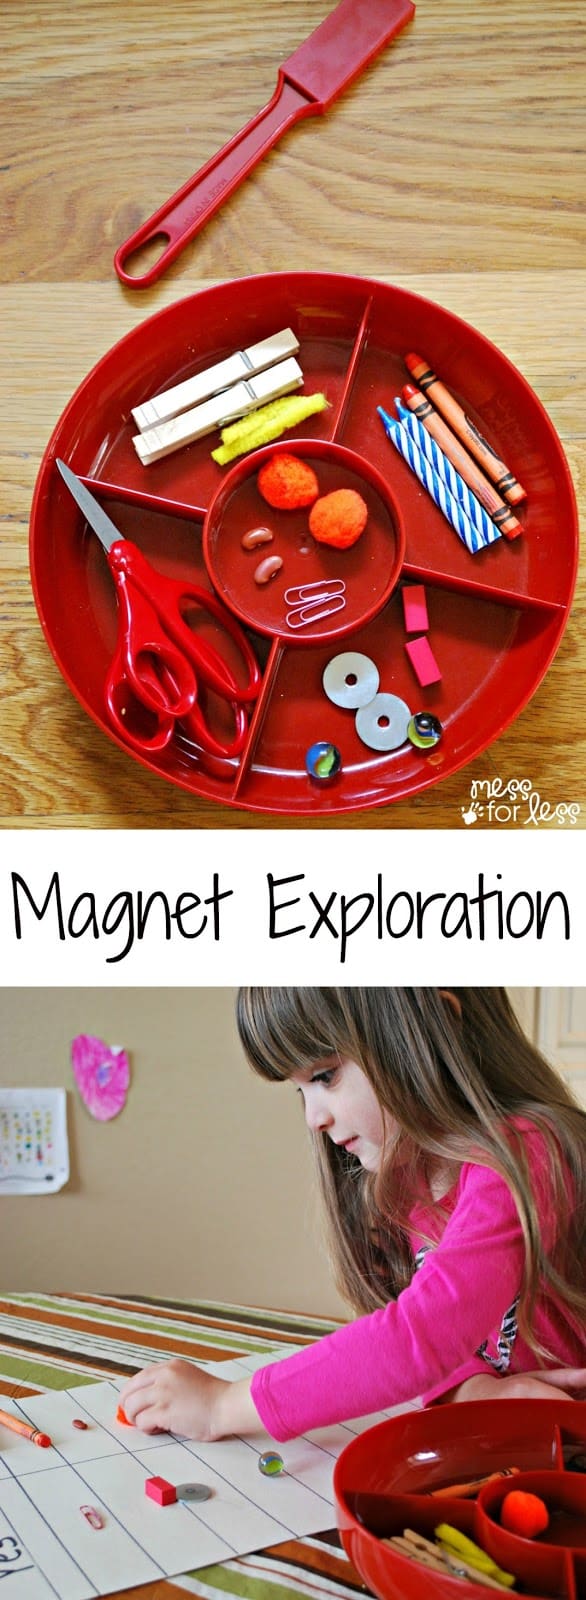 Preschool Science - Magnet Exploration Kids learn about magnets are they guess which items are magnetic and test out their theories.